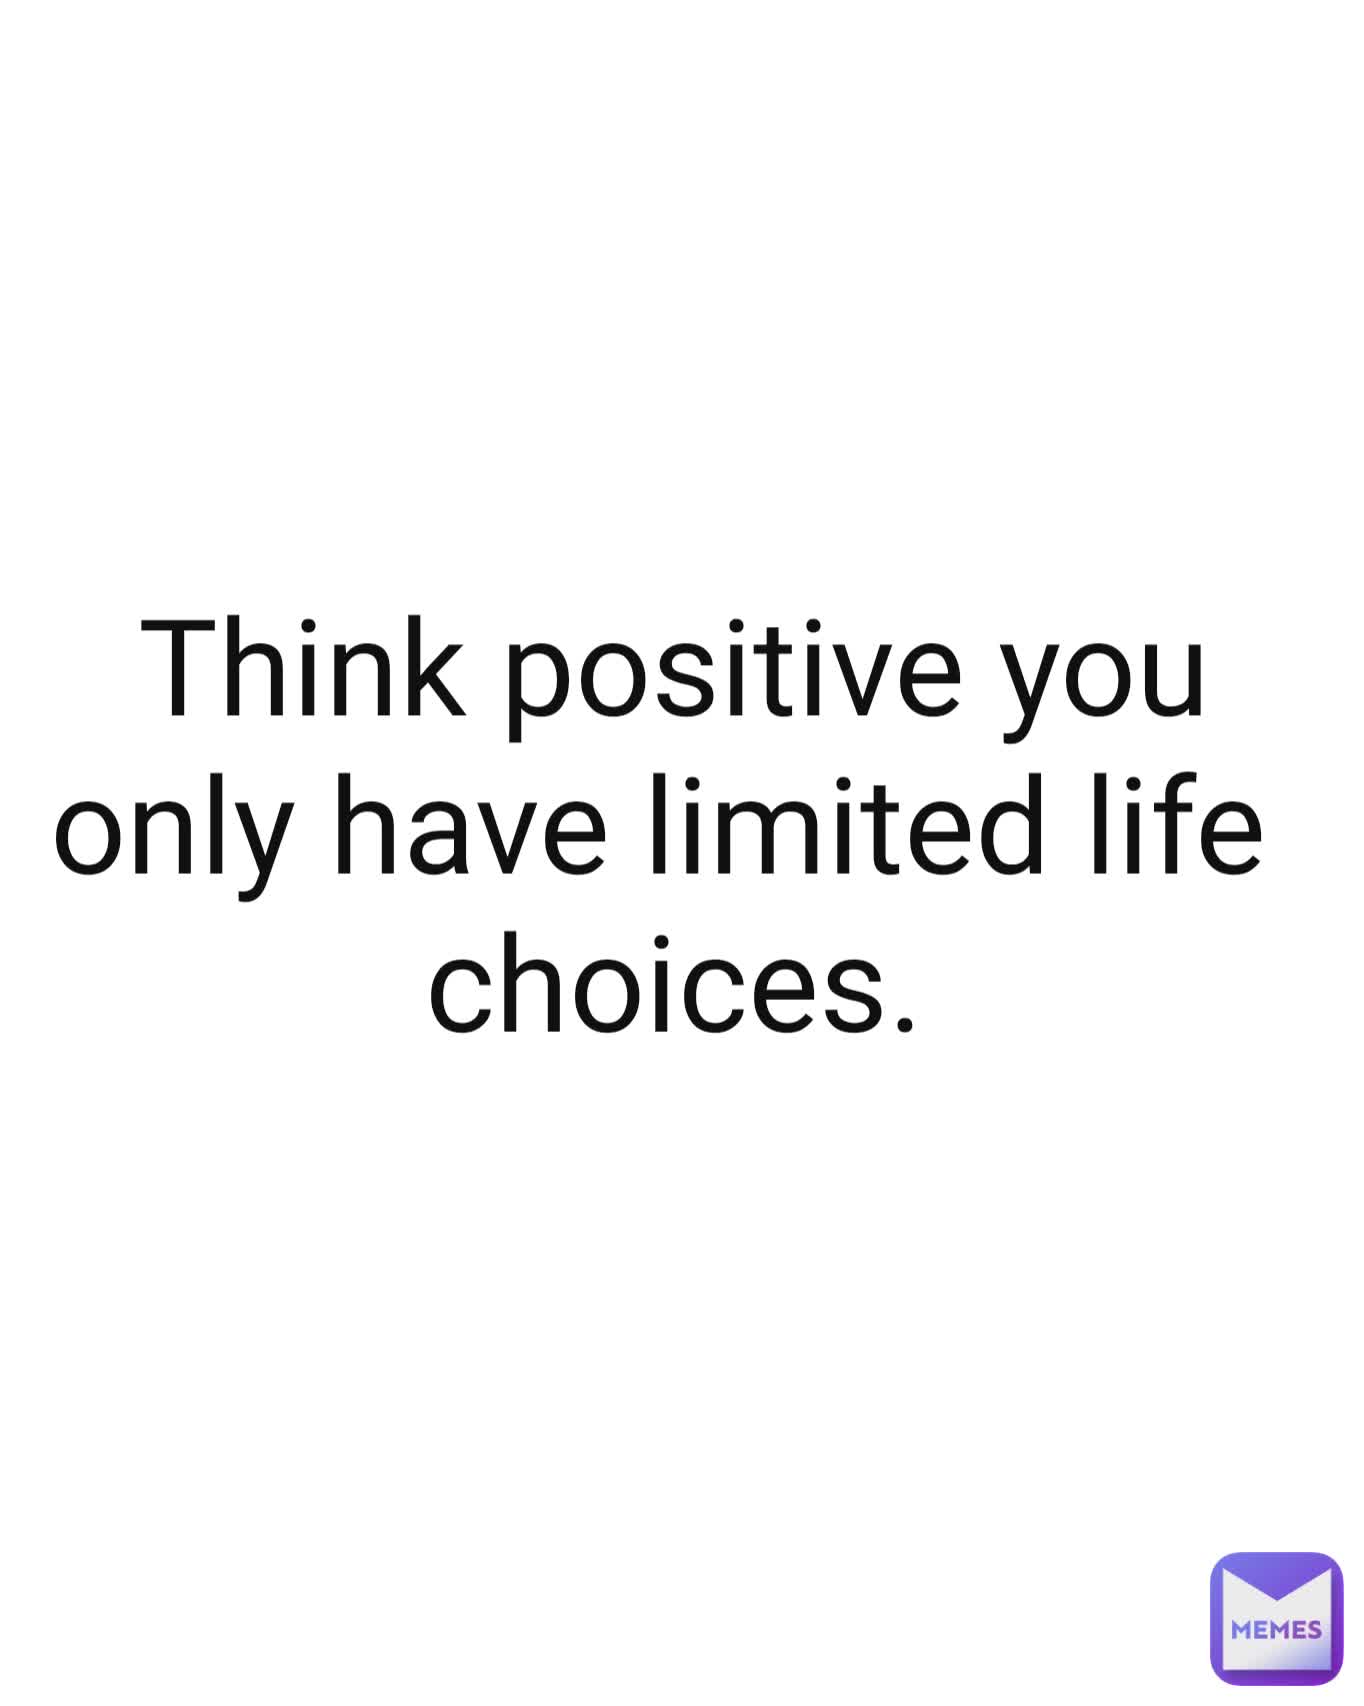 Think positive you only have limited life 
choices.